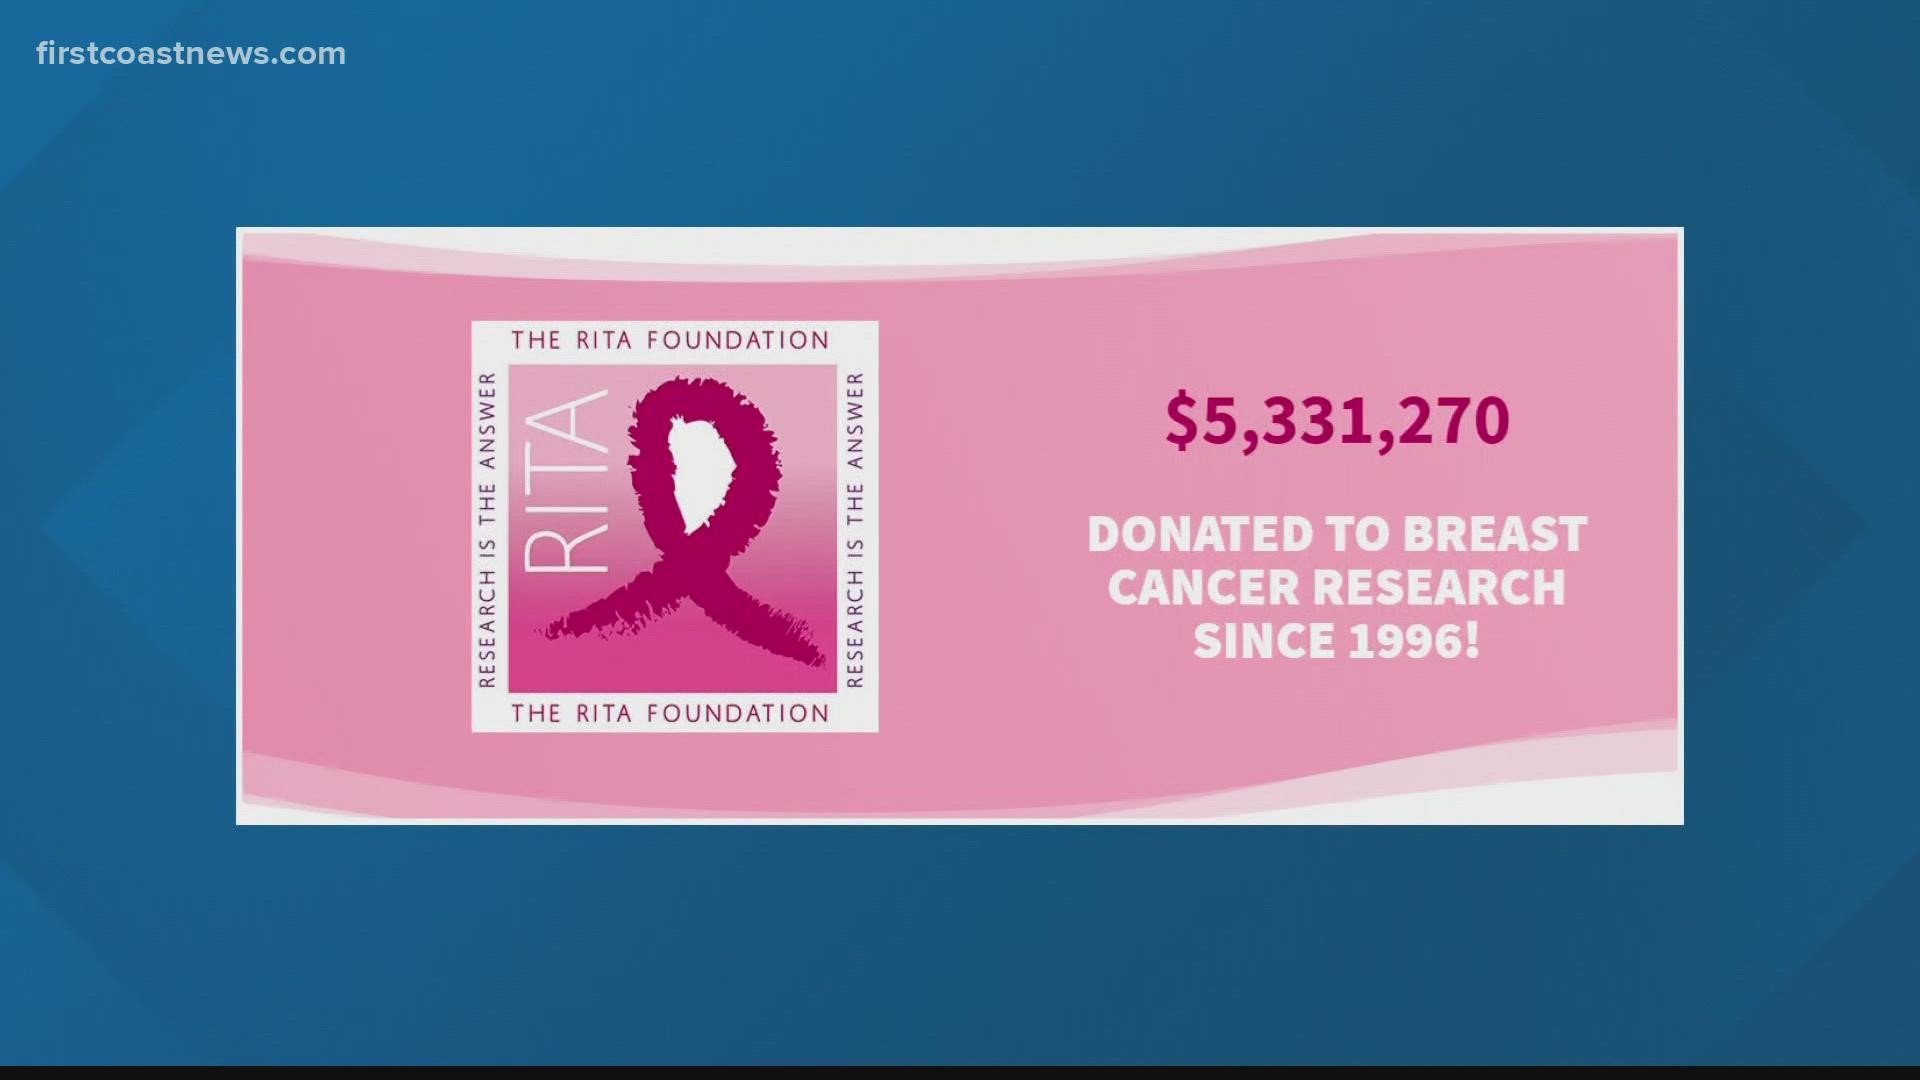 Cancer.net says that "an estimated 2,670 men in the United States are diagnosed with breast cancer yearly."